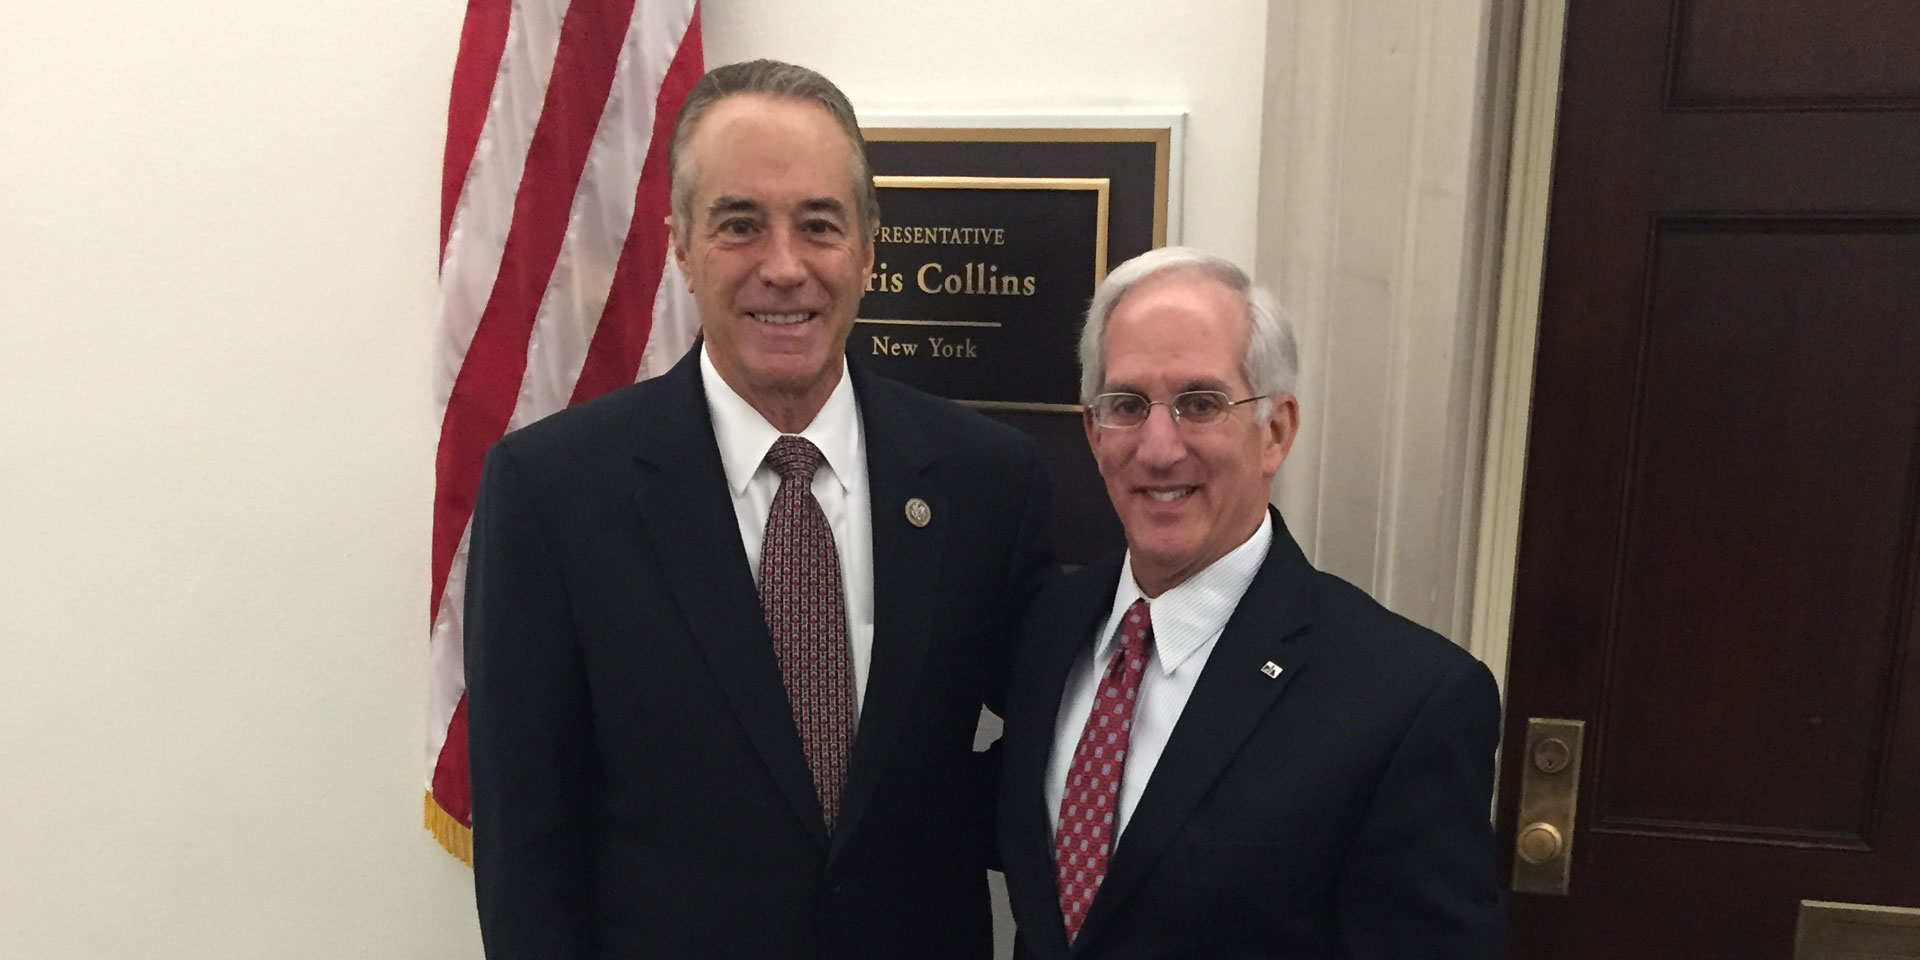 L-R: Rep. Chris Collins, R-27, and President-elect Fred Holender, CLU, CPCU, ChFC, MSFS.